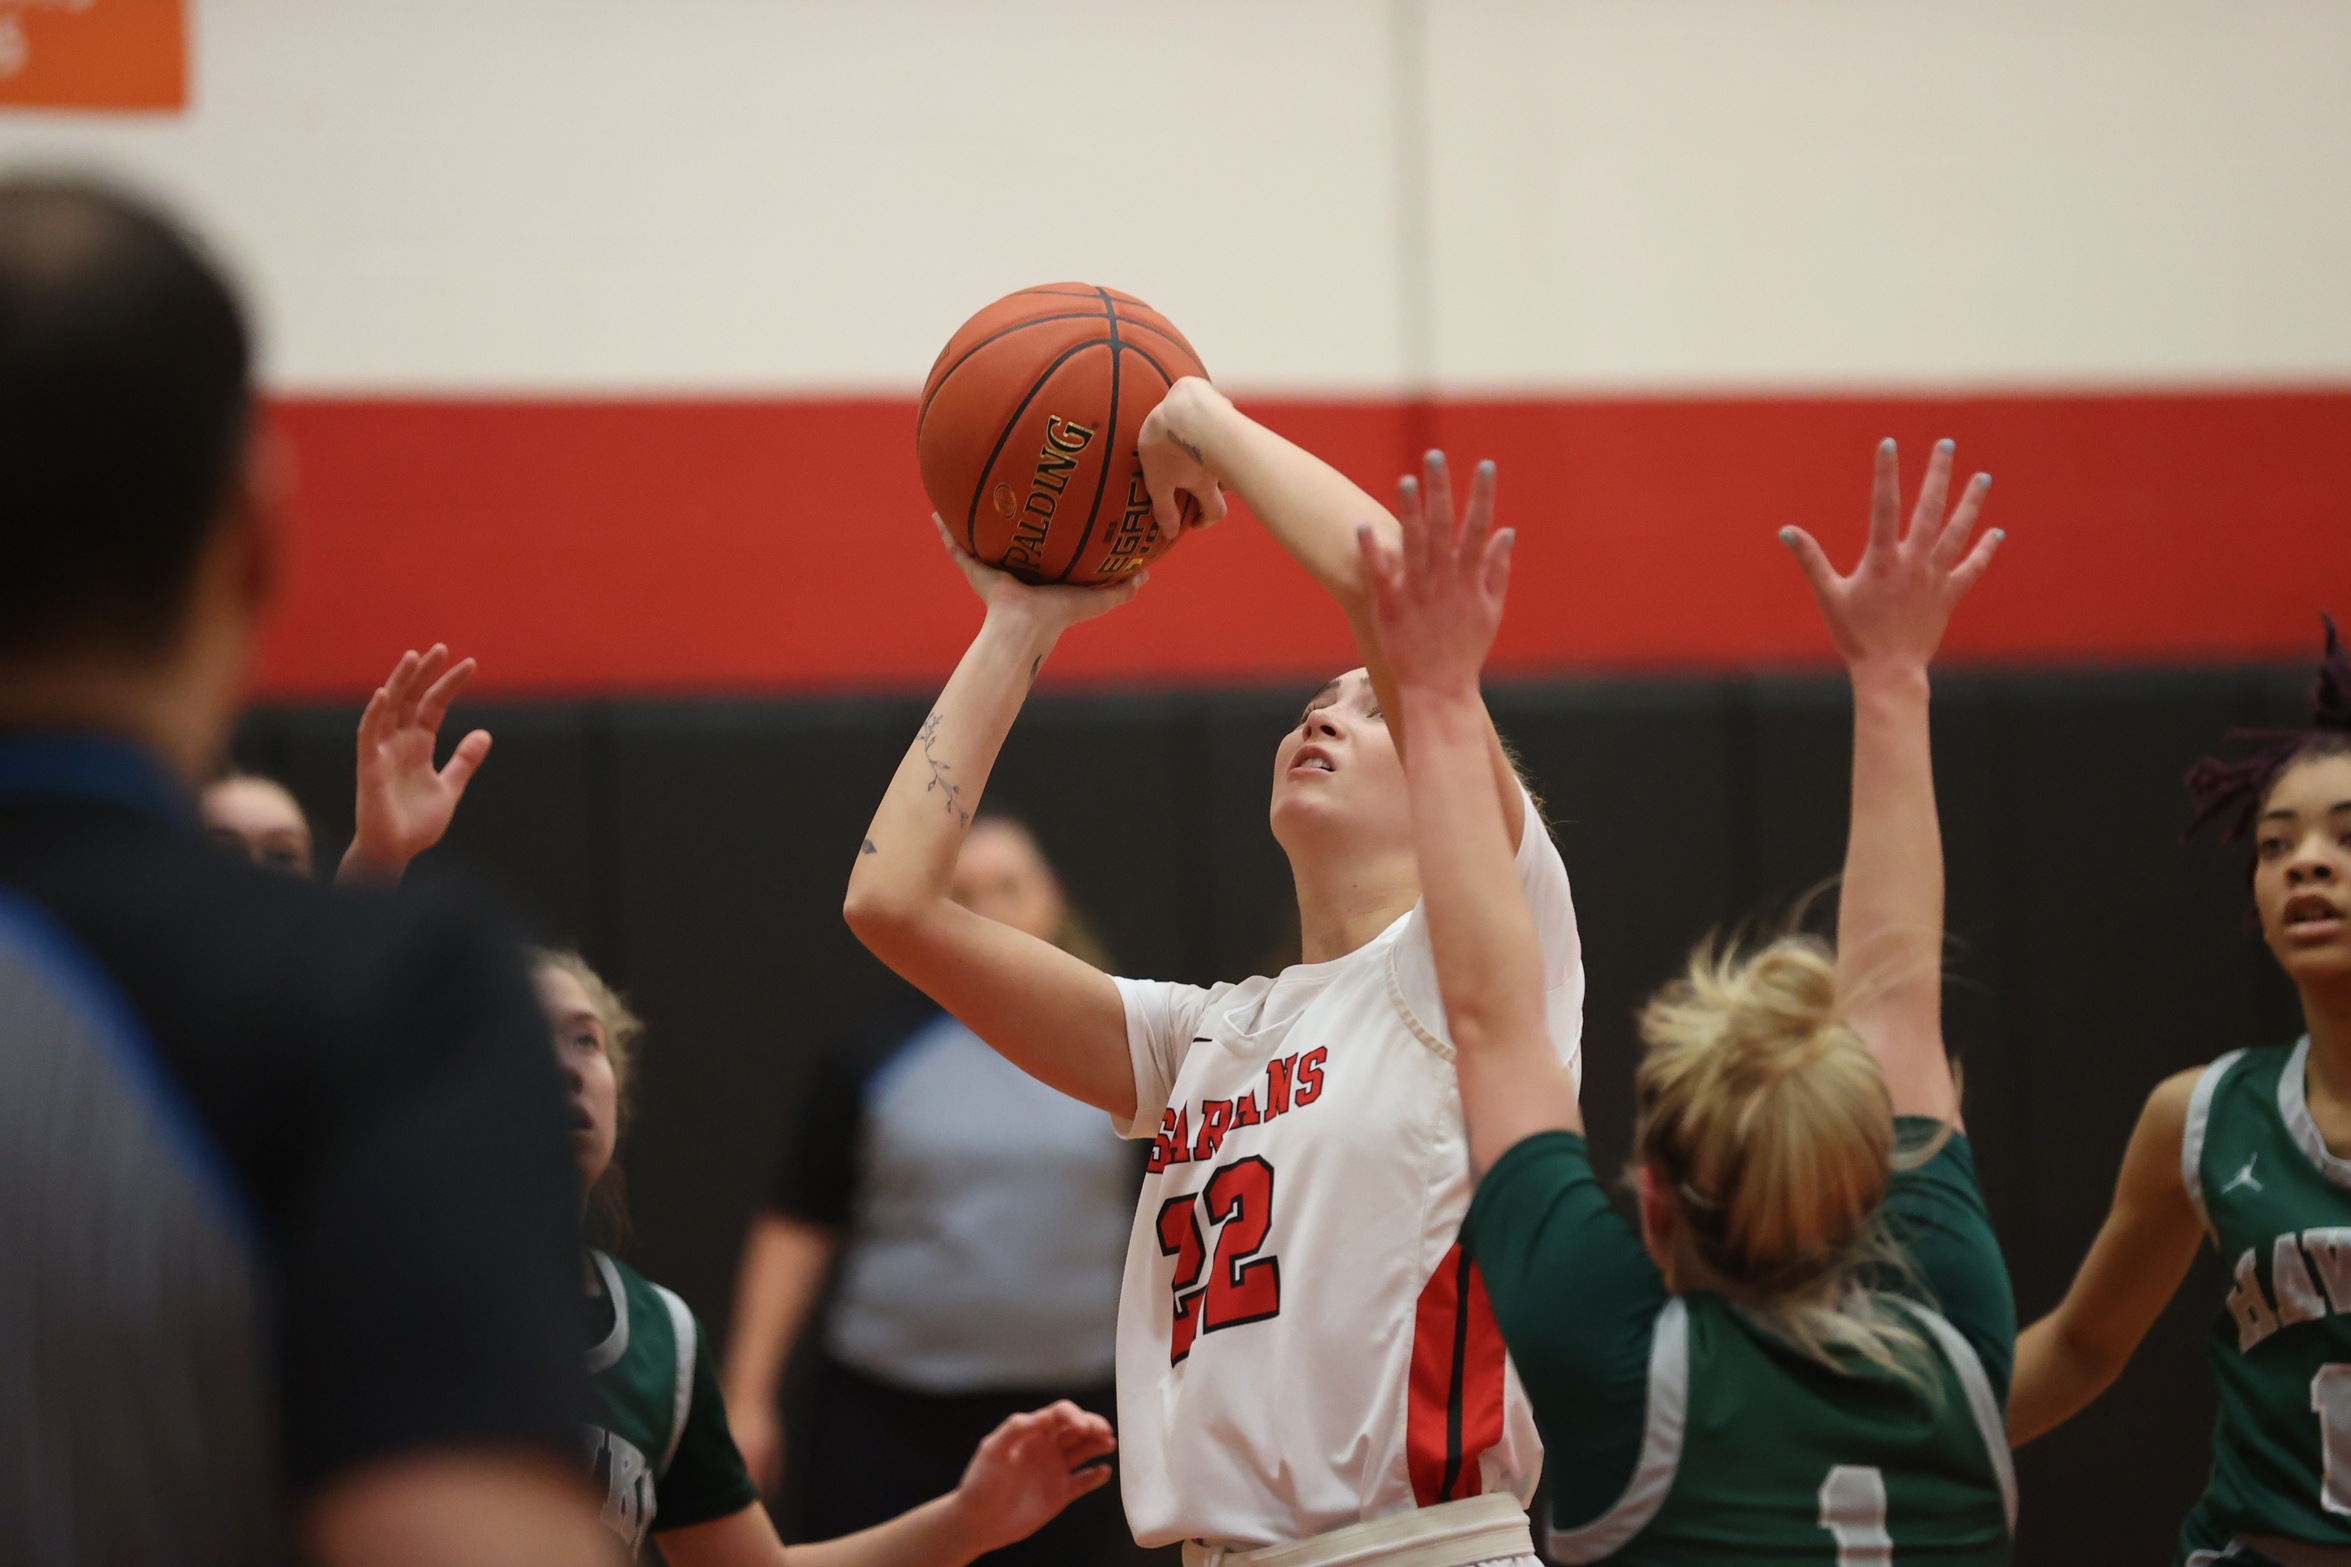 Haley Mosch led the Spartans with 12 points and five steals in a loss to OCC on Saturday.